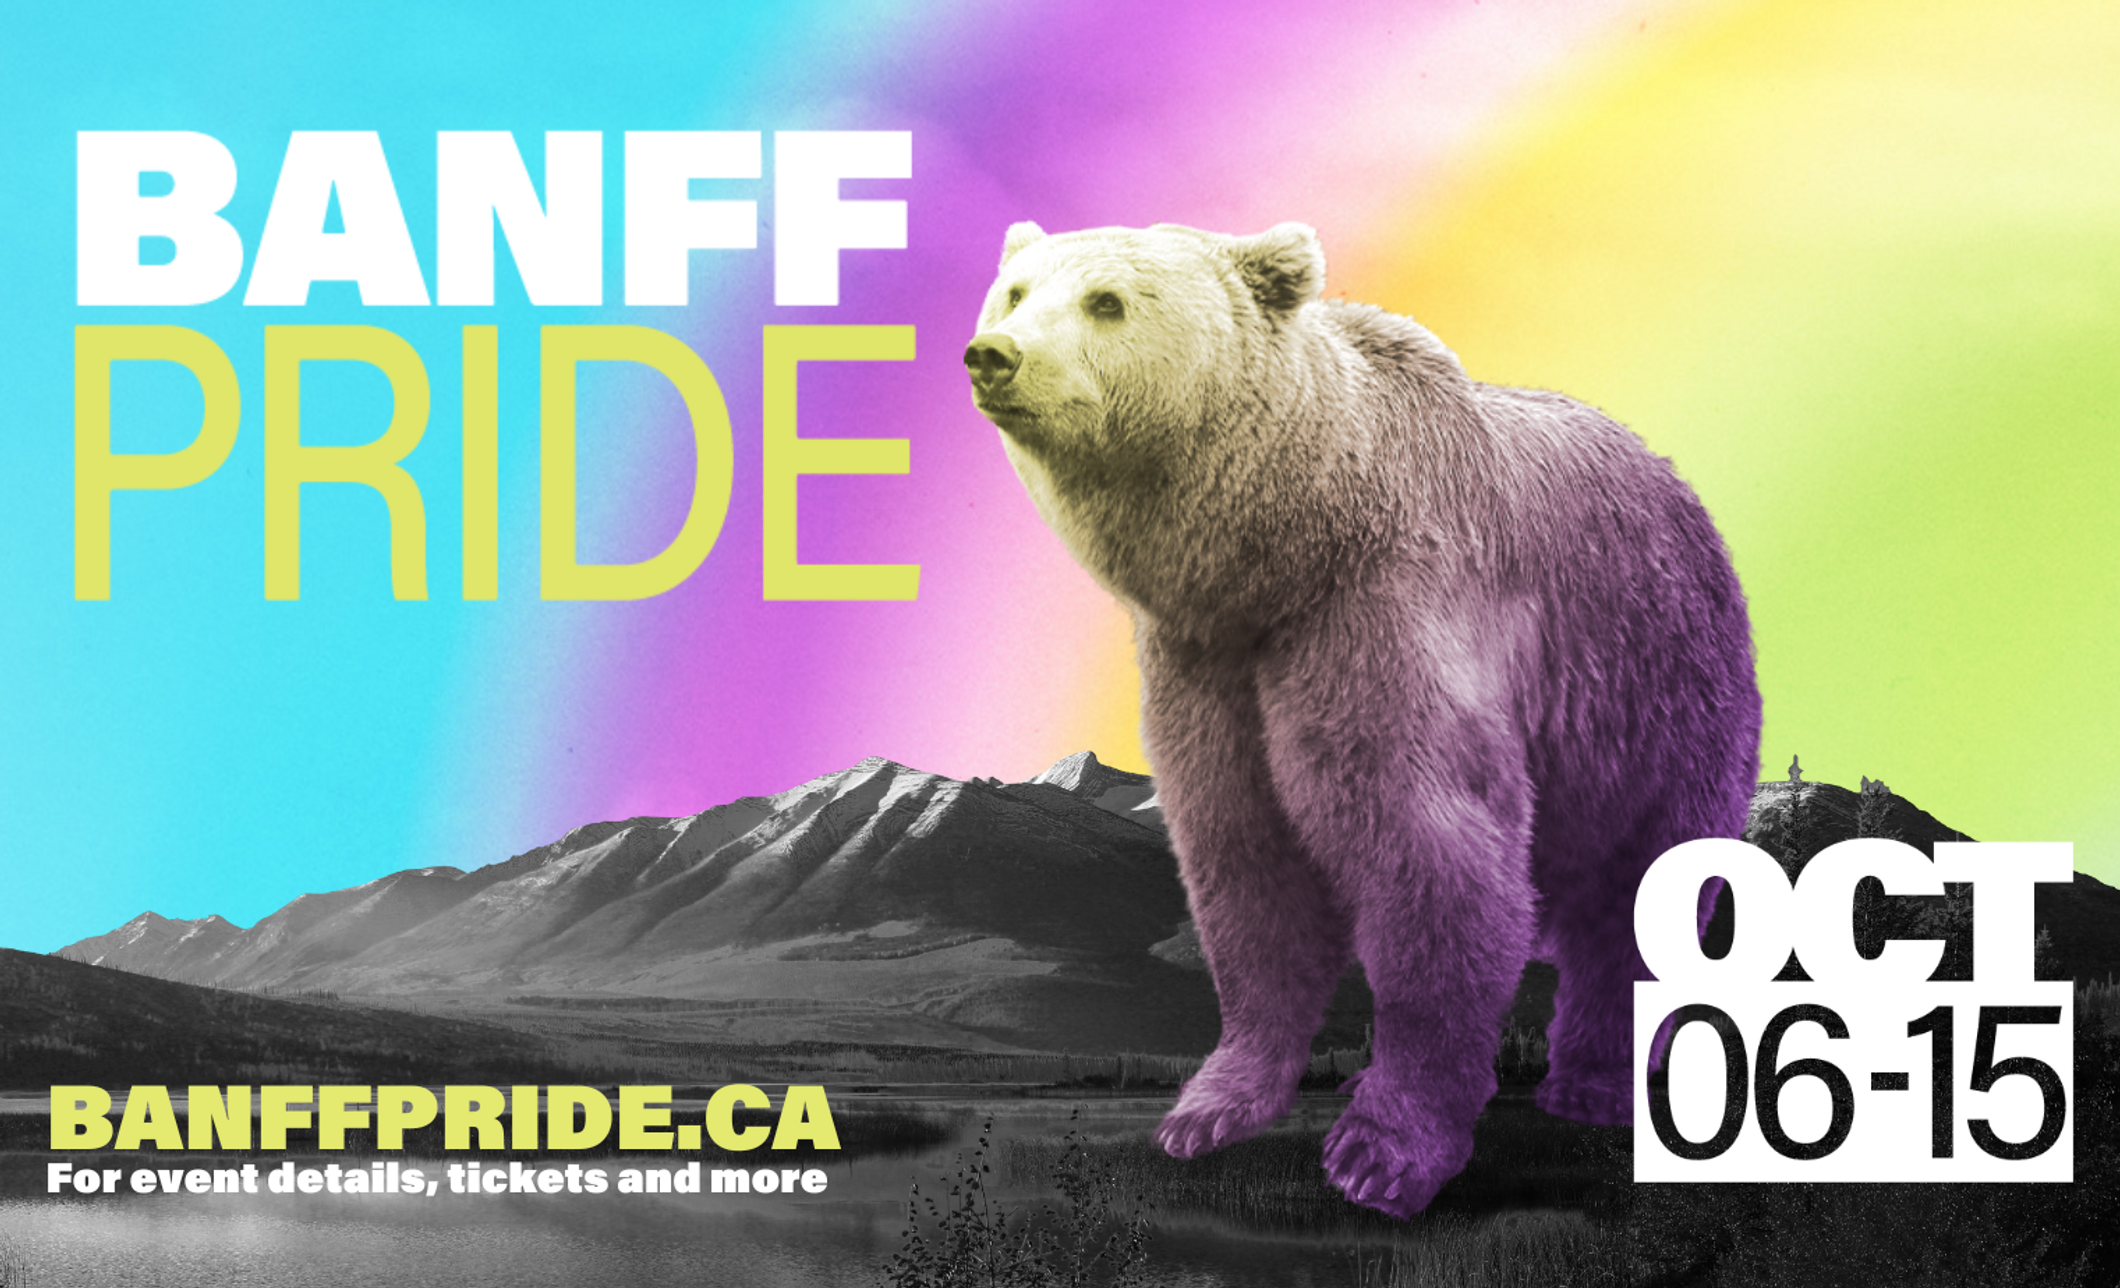 A poster for Banff Pride with a bear and their logo on it.